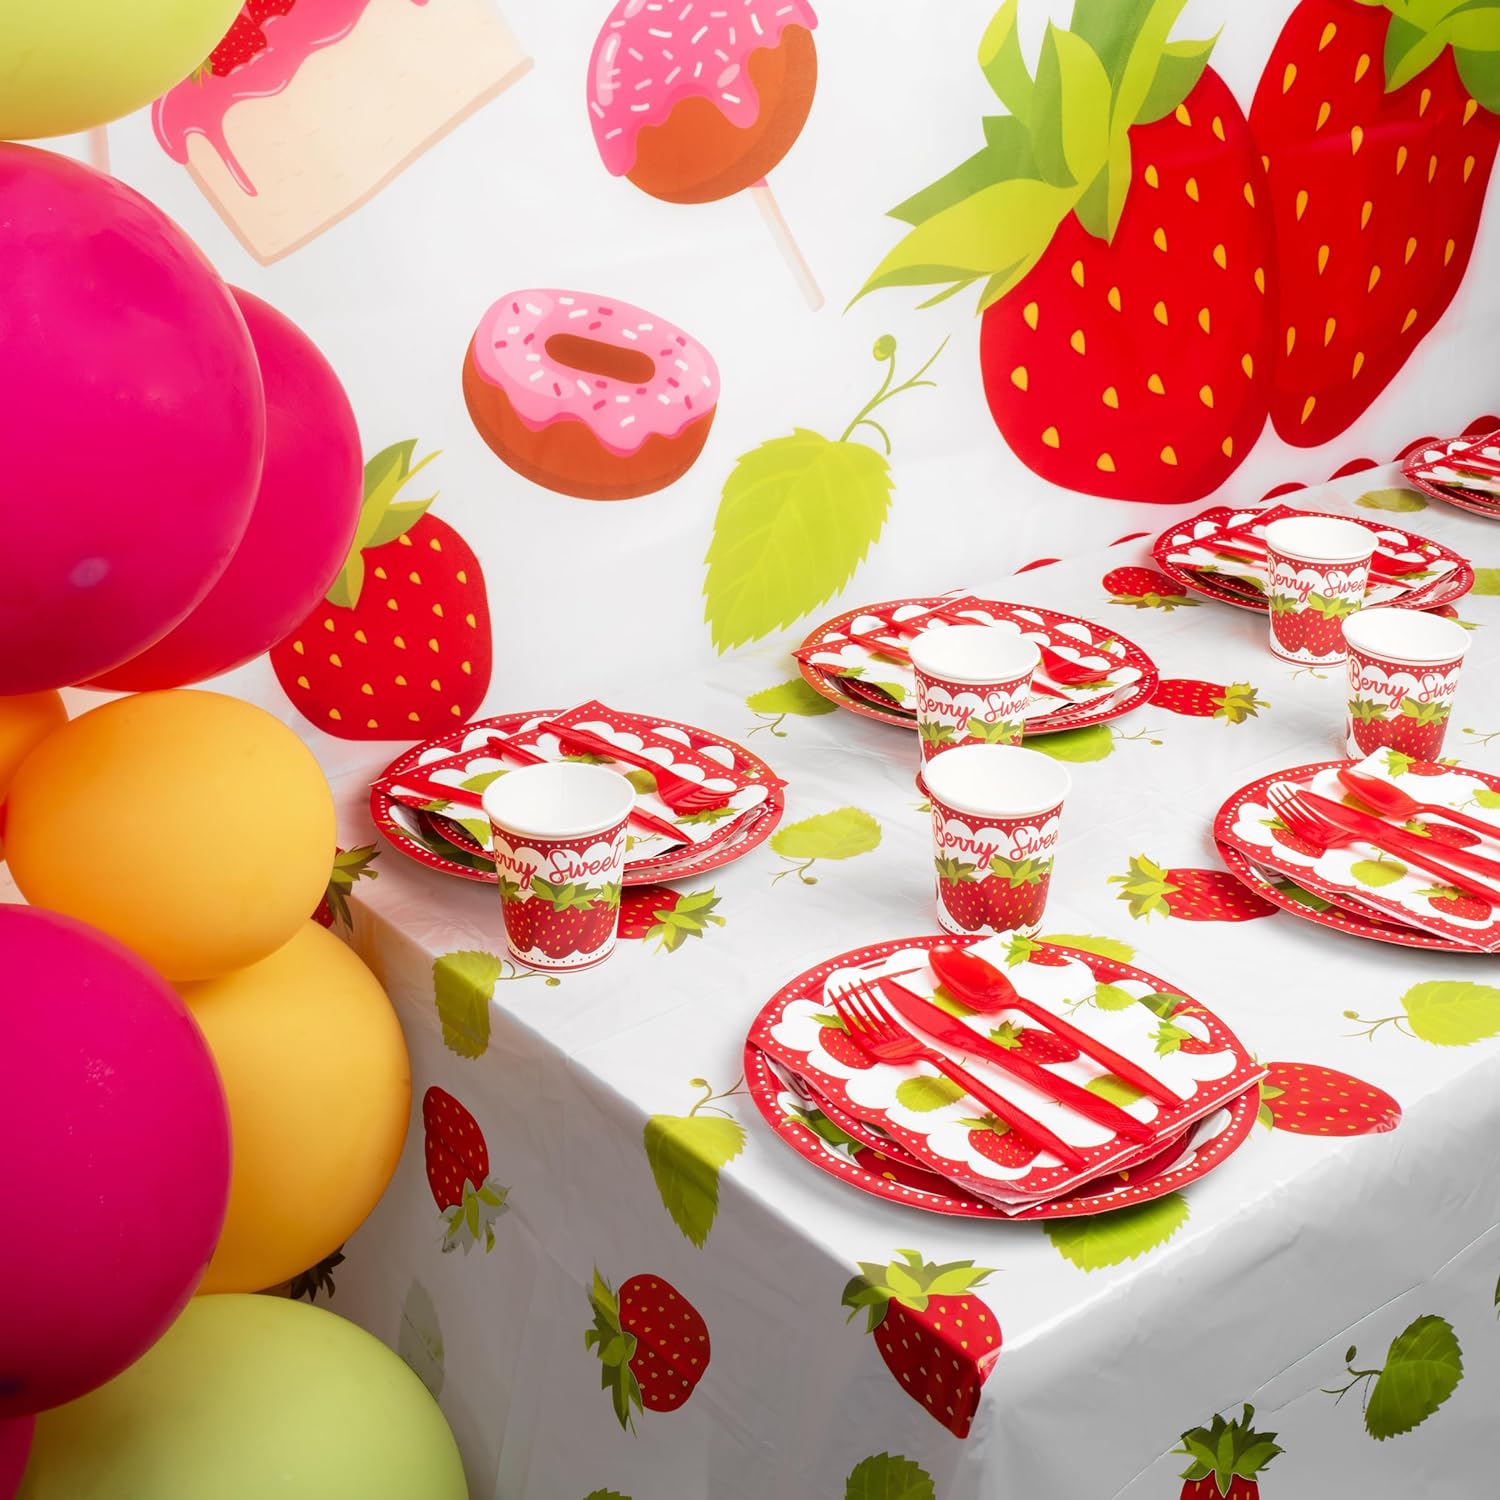 All-in-One 357 Pc Strawberry Party Decorations (Serves 24) Strawberry Party Supplies with Plates, Cups, Napkins, Tablecloth, Balloons, Cake and Cupcake Topper and More Shortcake Birthday Decorations